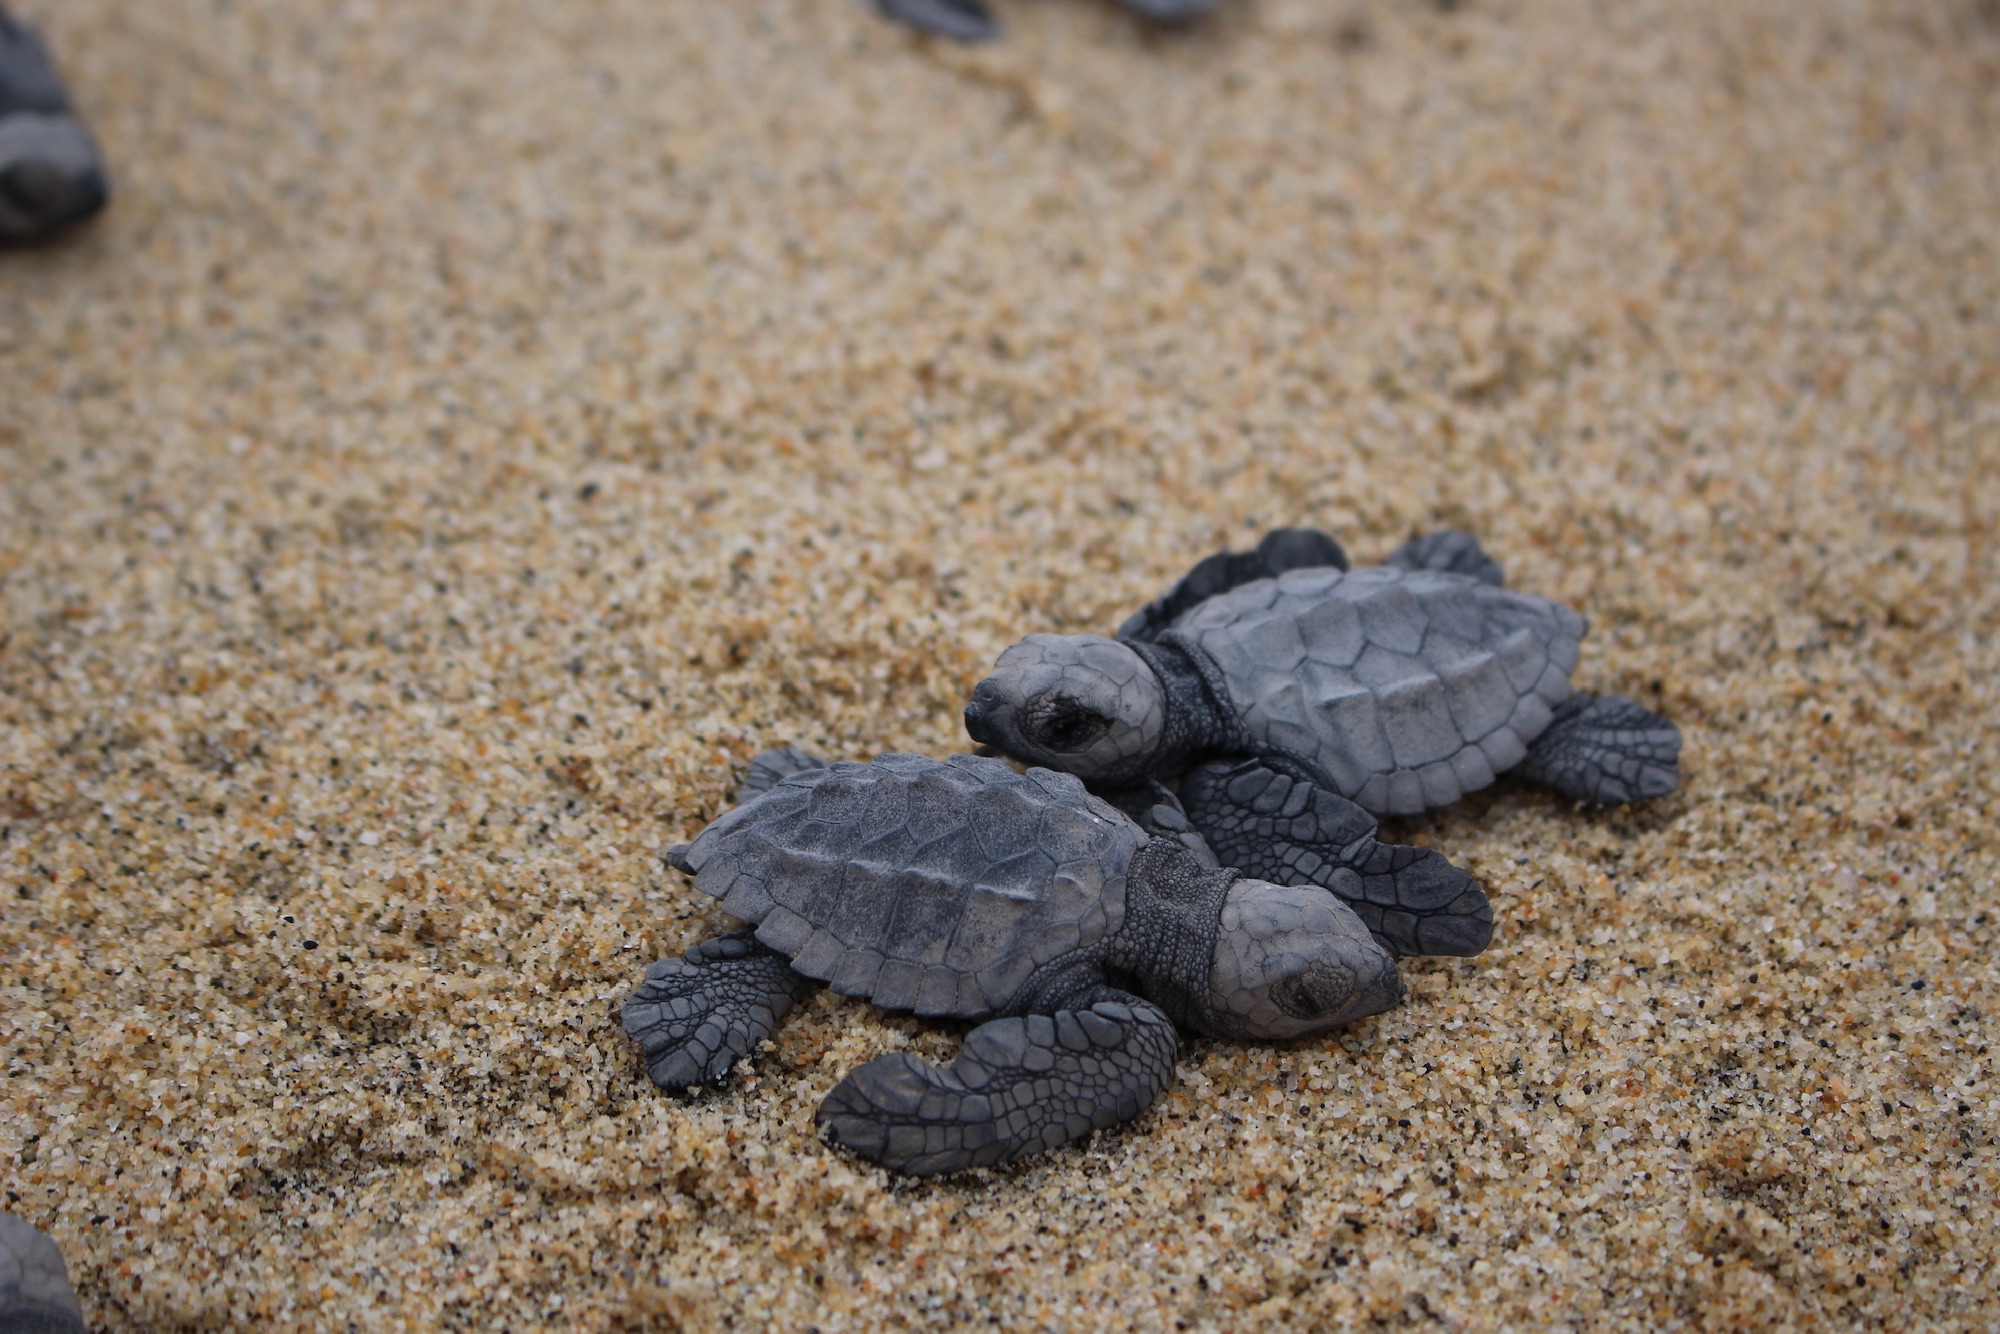 Two baby sea turtles.